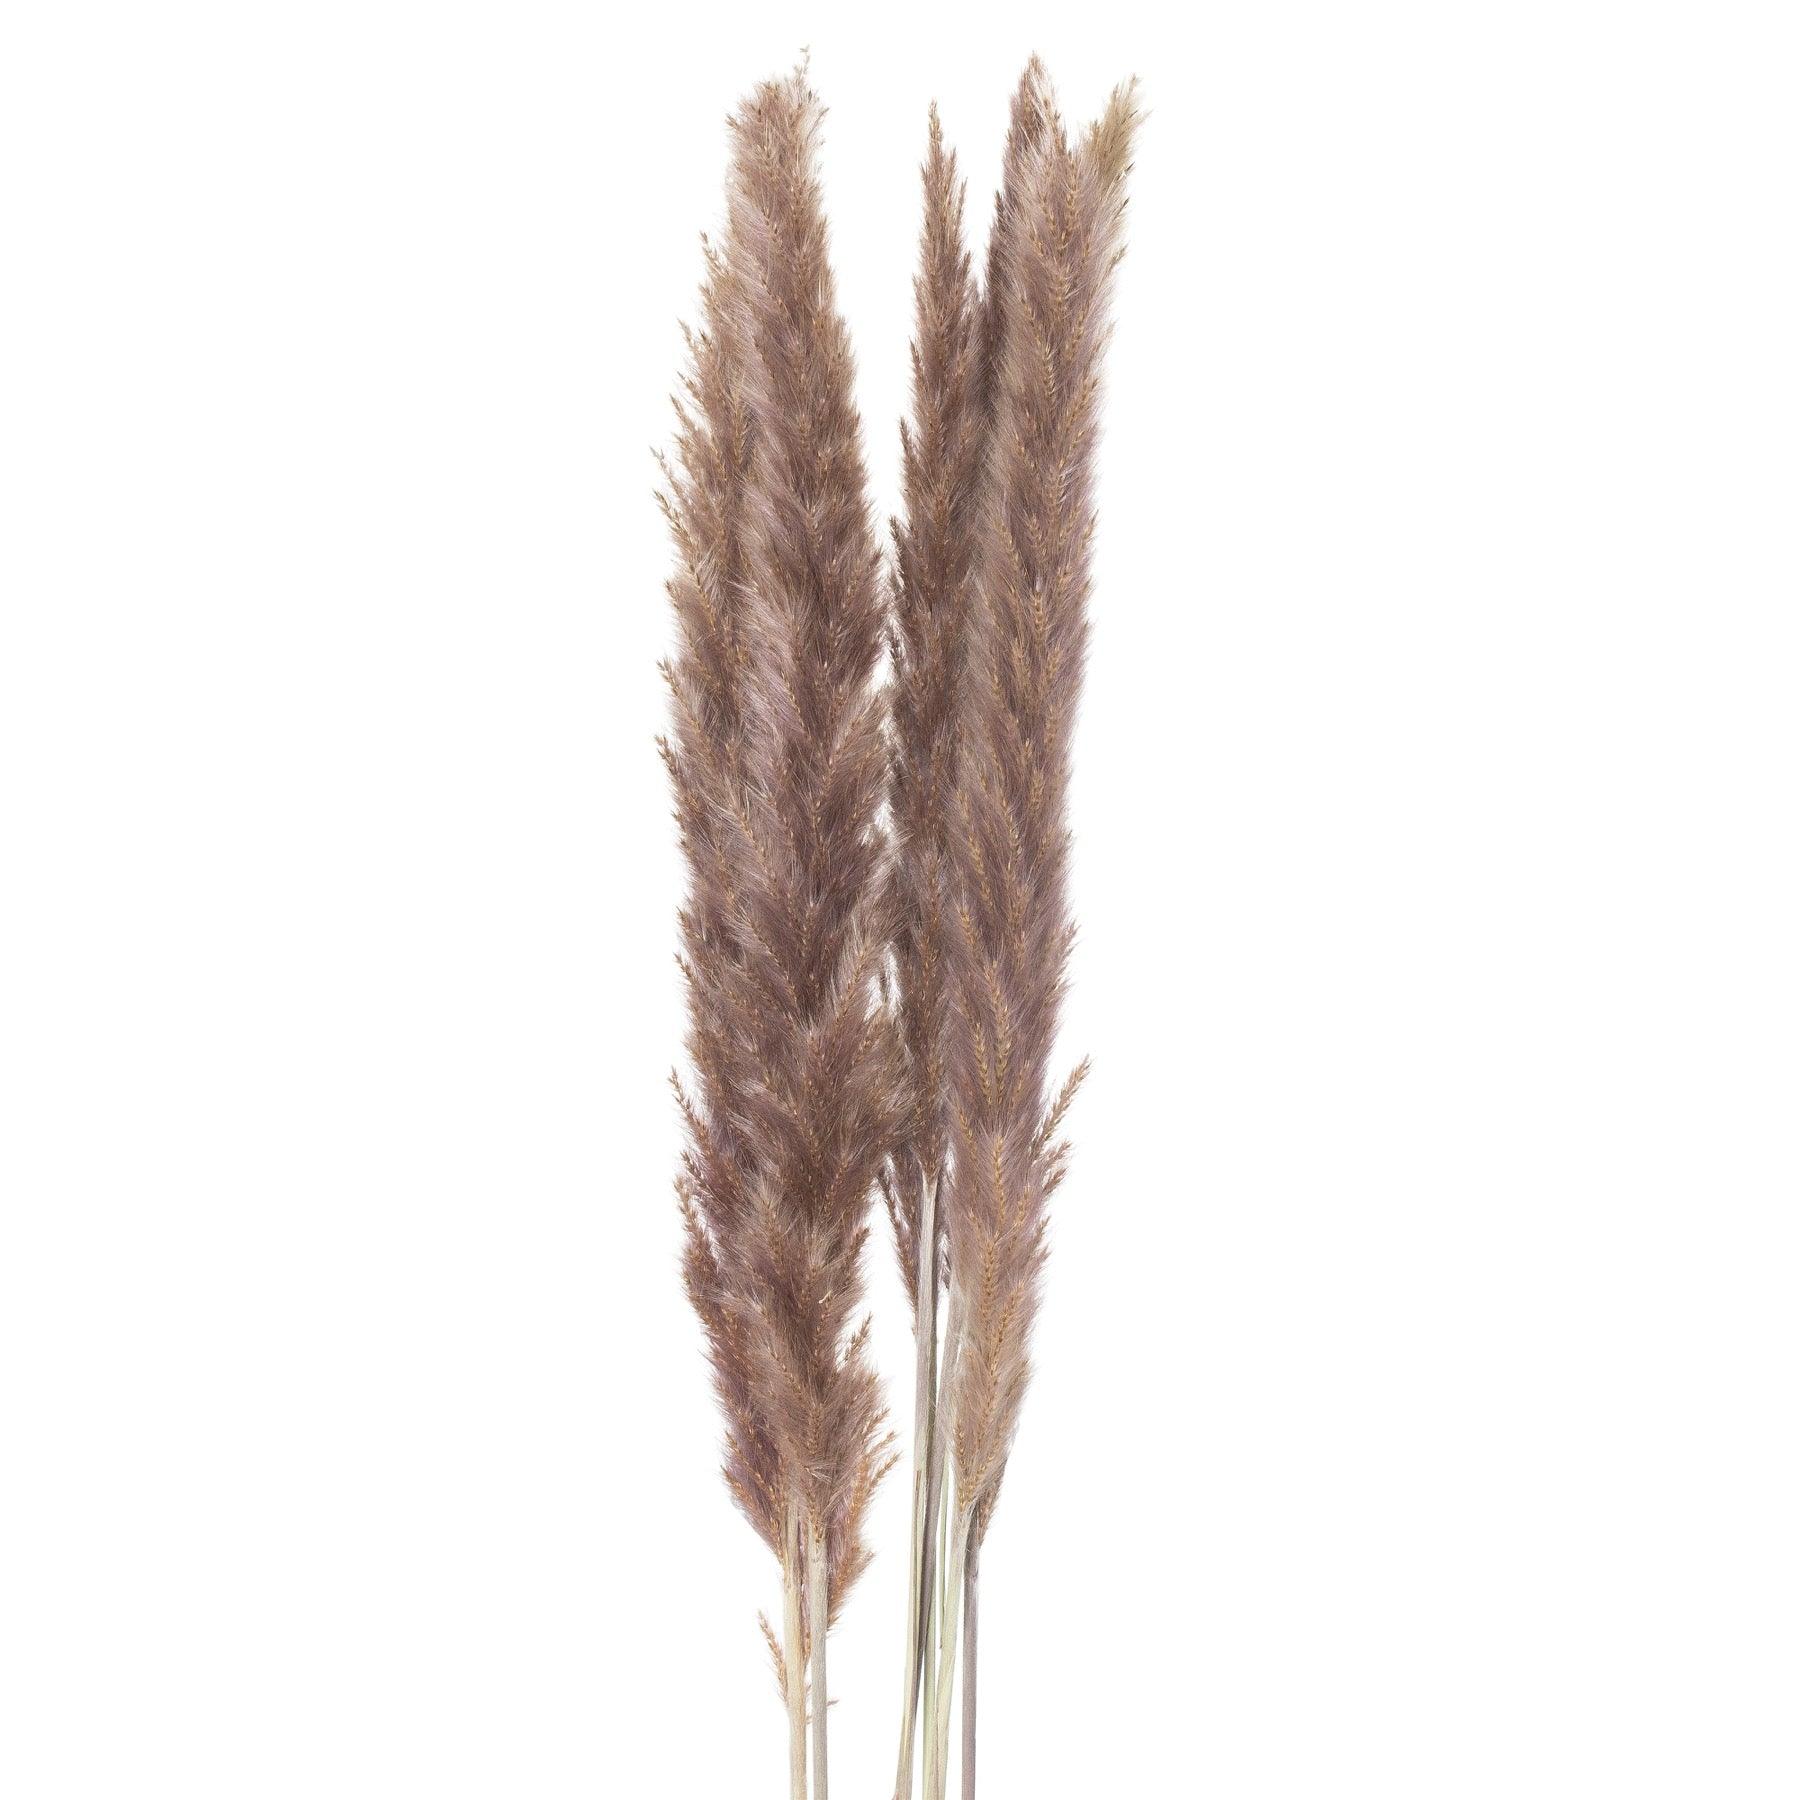 View Mini Natural Pampas Grass Bunch of 15 information